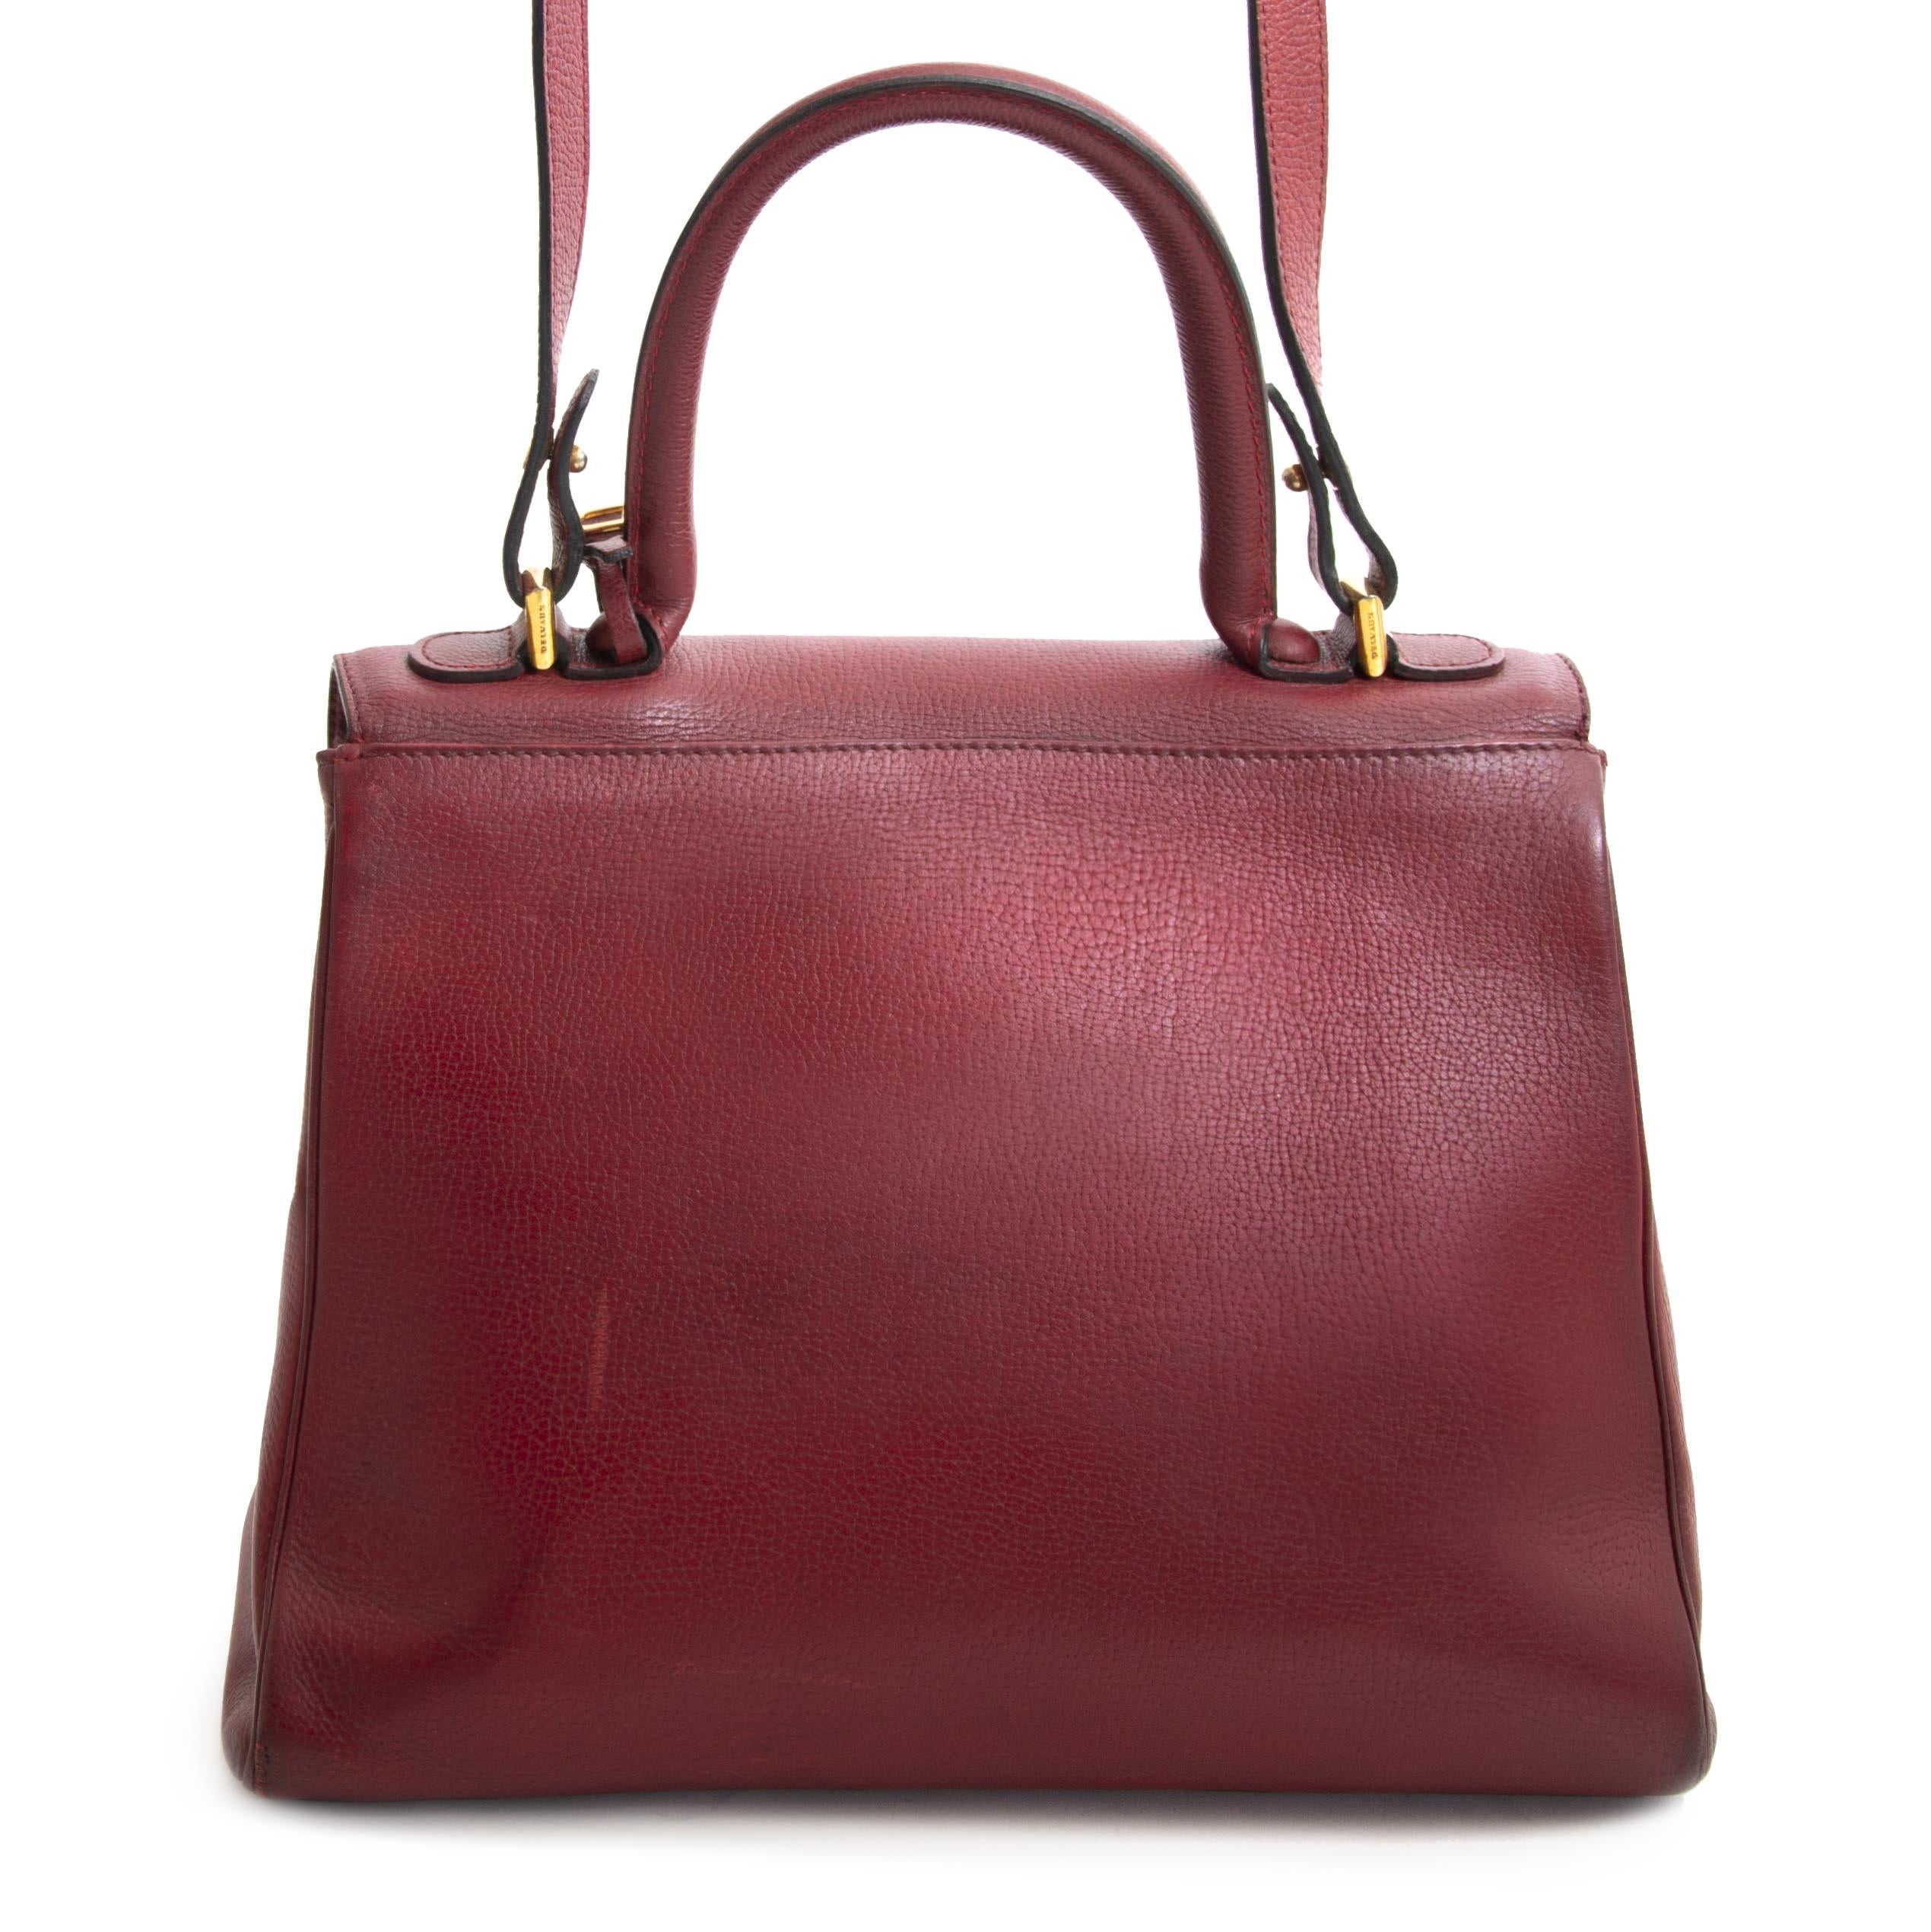 Good preloved condition

Delvaux Brillant Red MM GHW + Strap

Delvaux Brillant Red MM with gold hardware in red grained calsfkin leather.
This classic satchel from premium Belgium luxury leather goods House Delvaux excels in both style and